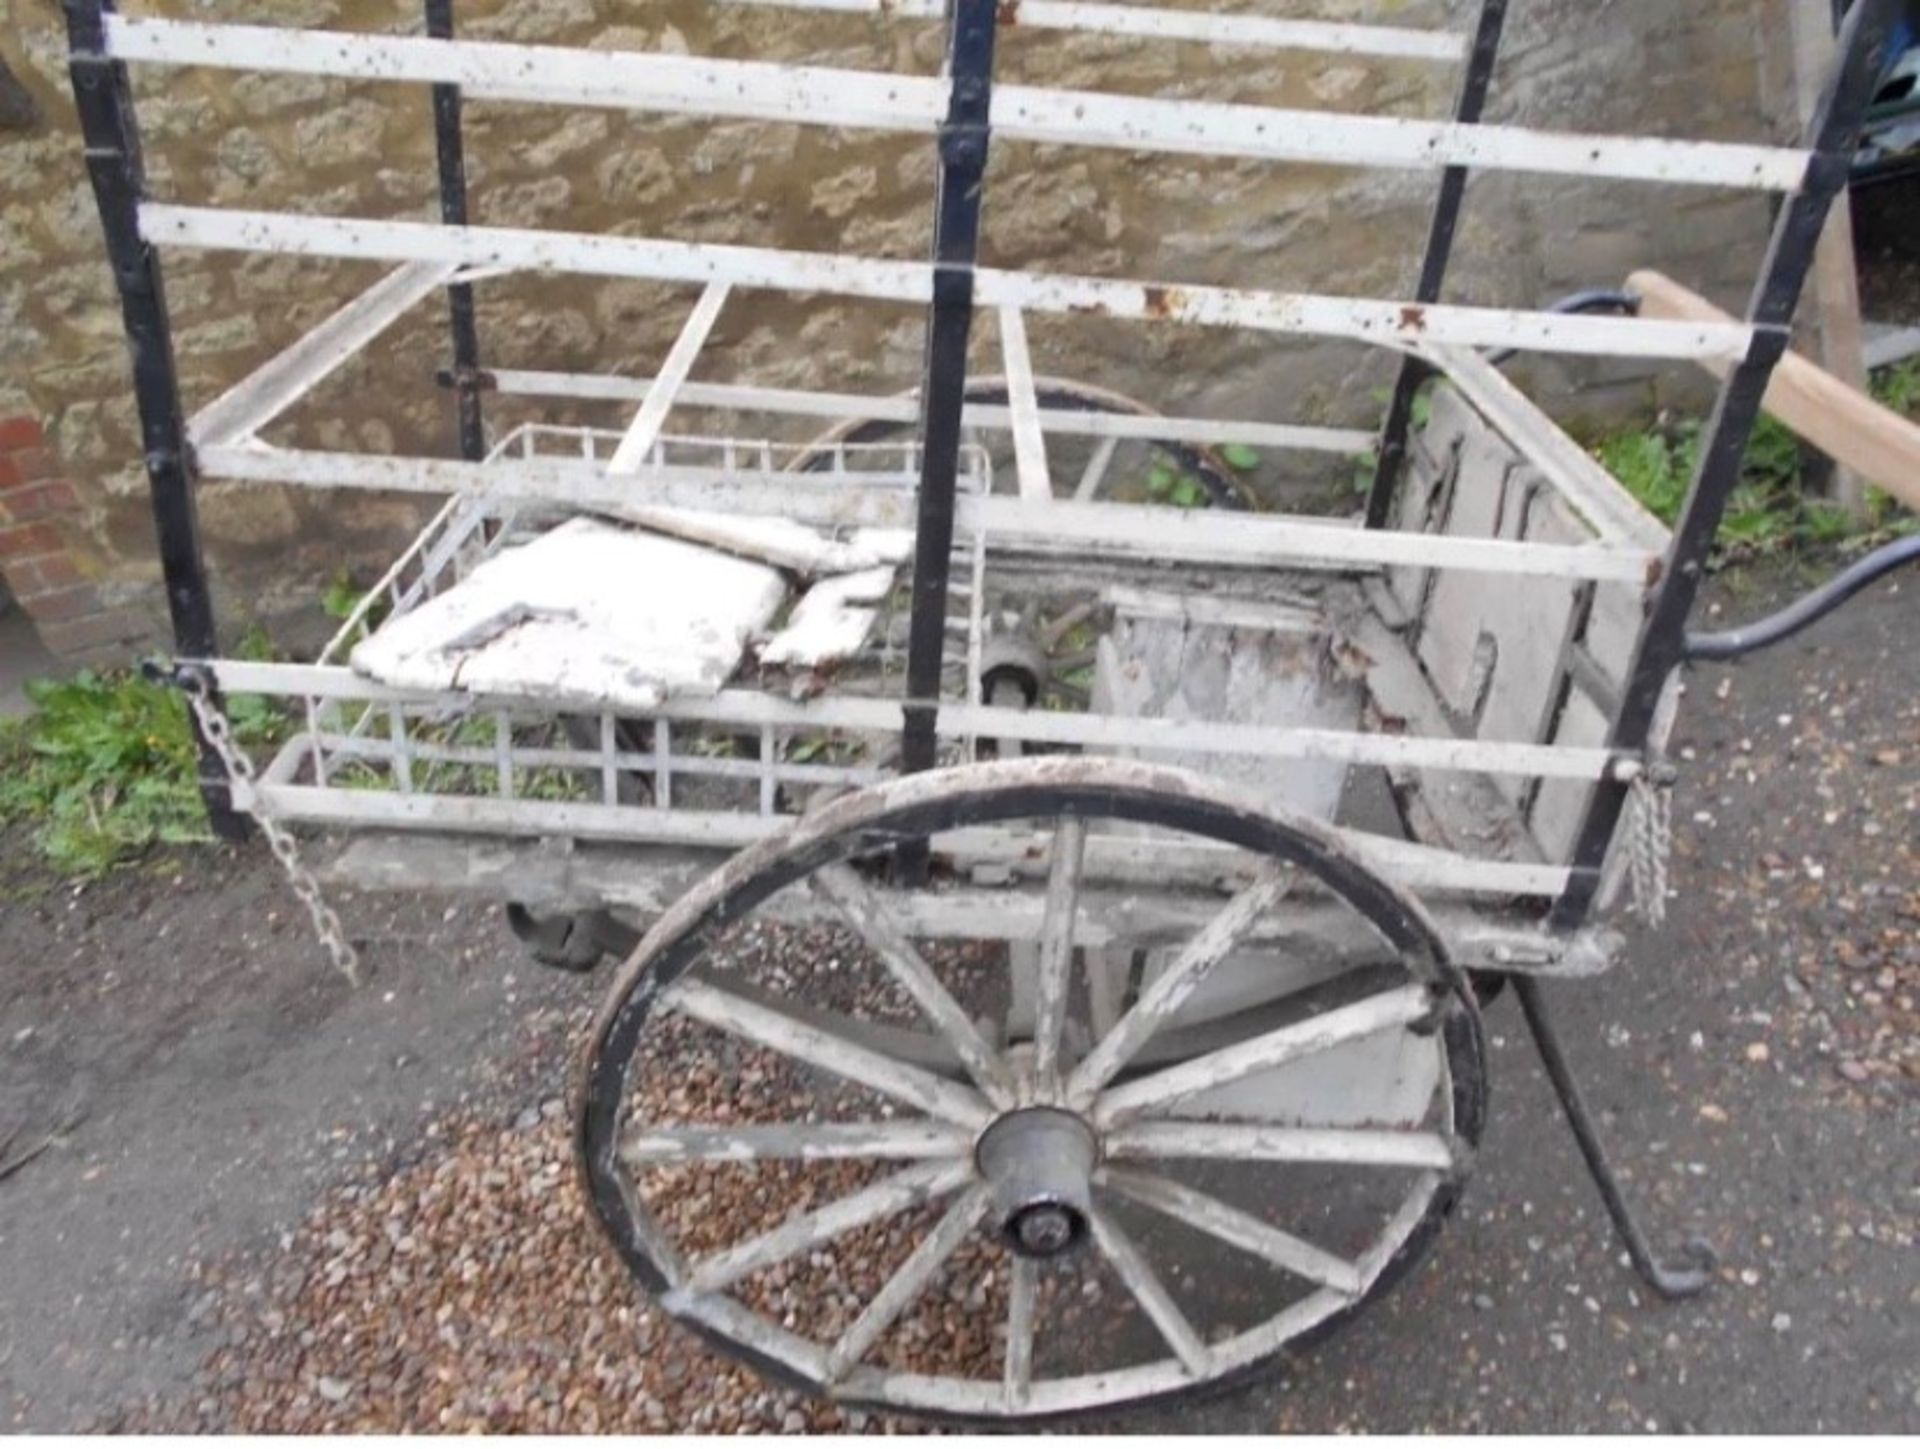 MILK PRAM with white open slatted sides, pram handle and metal stands. For restoration.